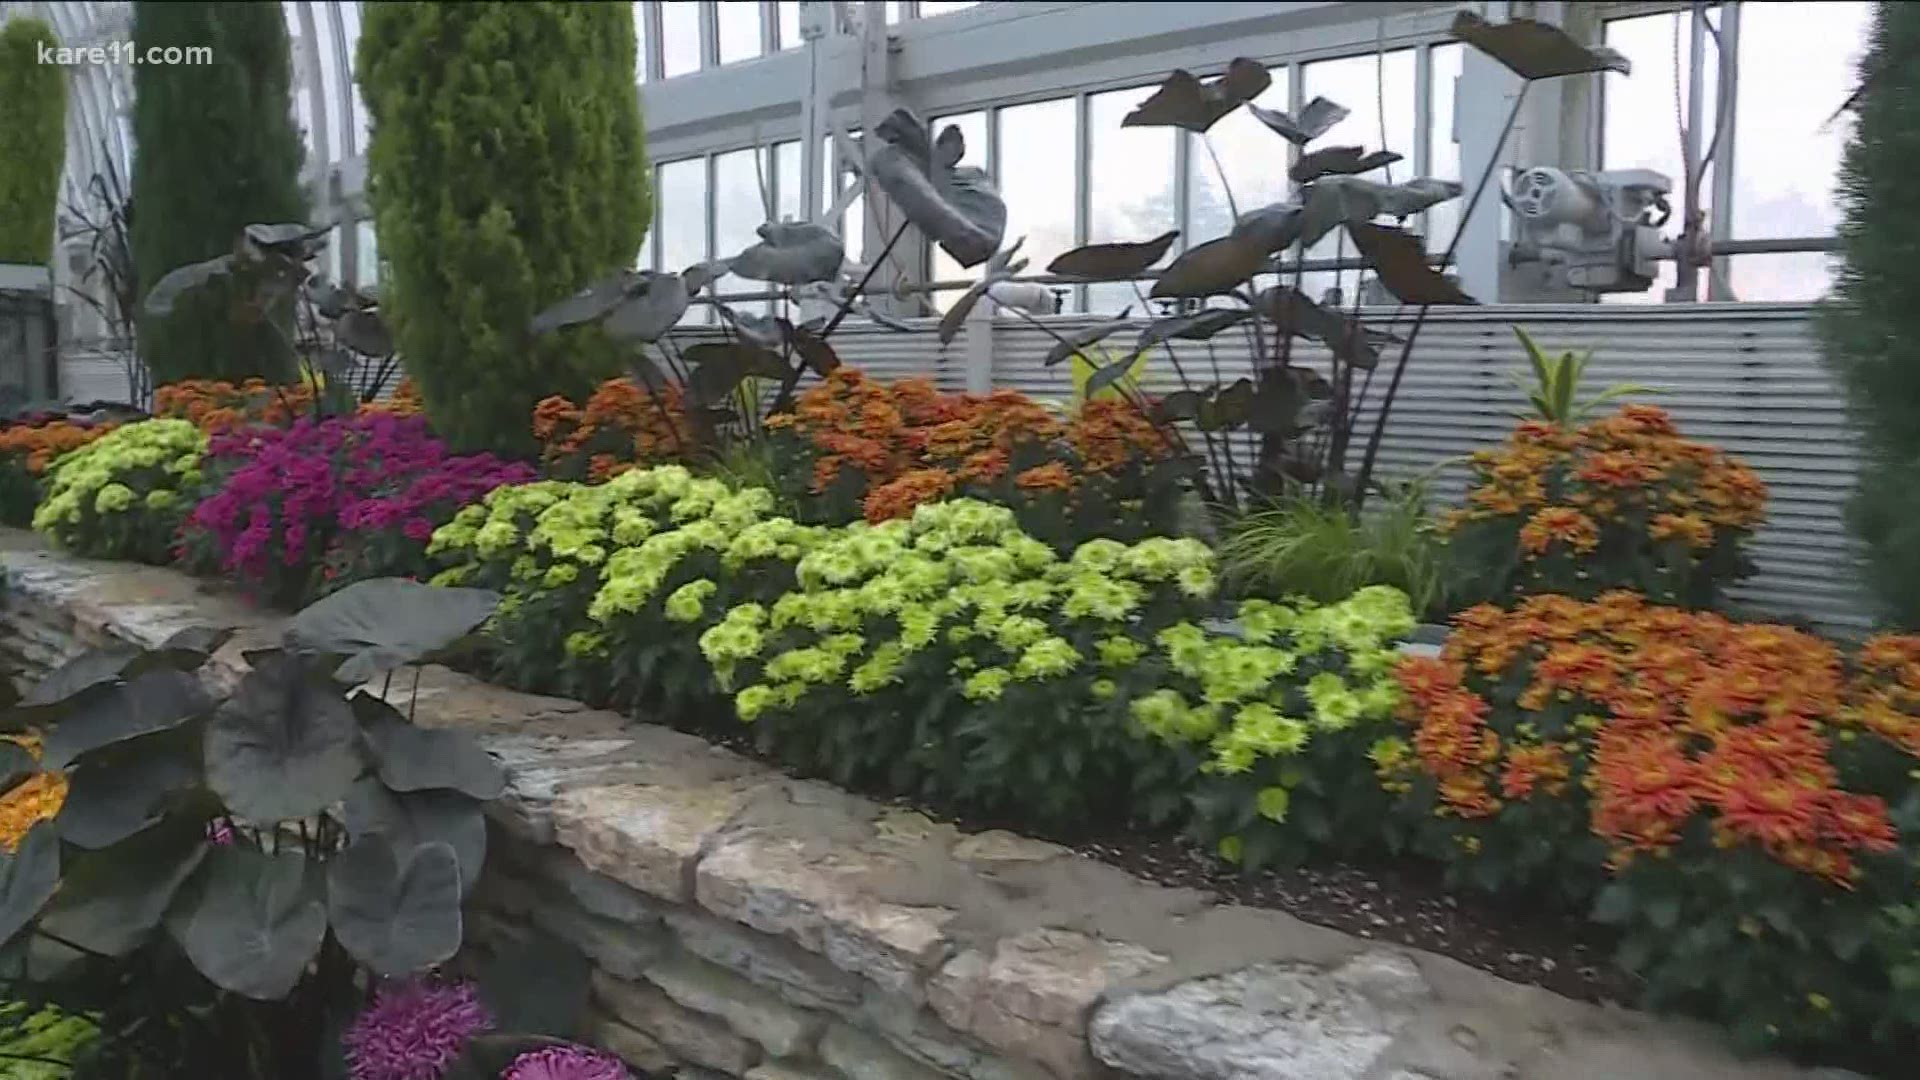 The annual Fall Flower Show is happening at the Marjorie McNeely Conservatory.